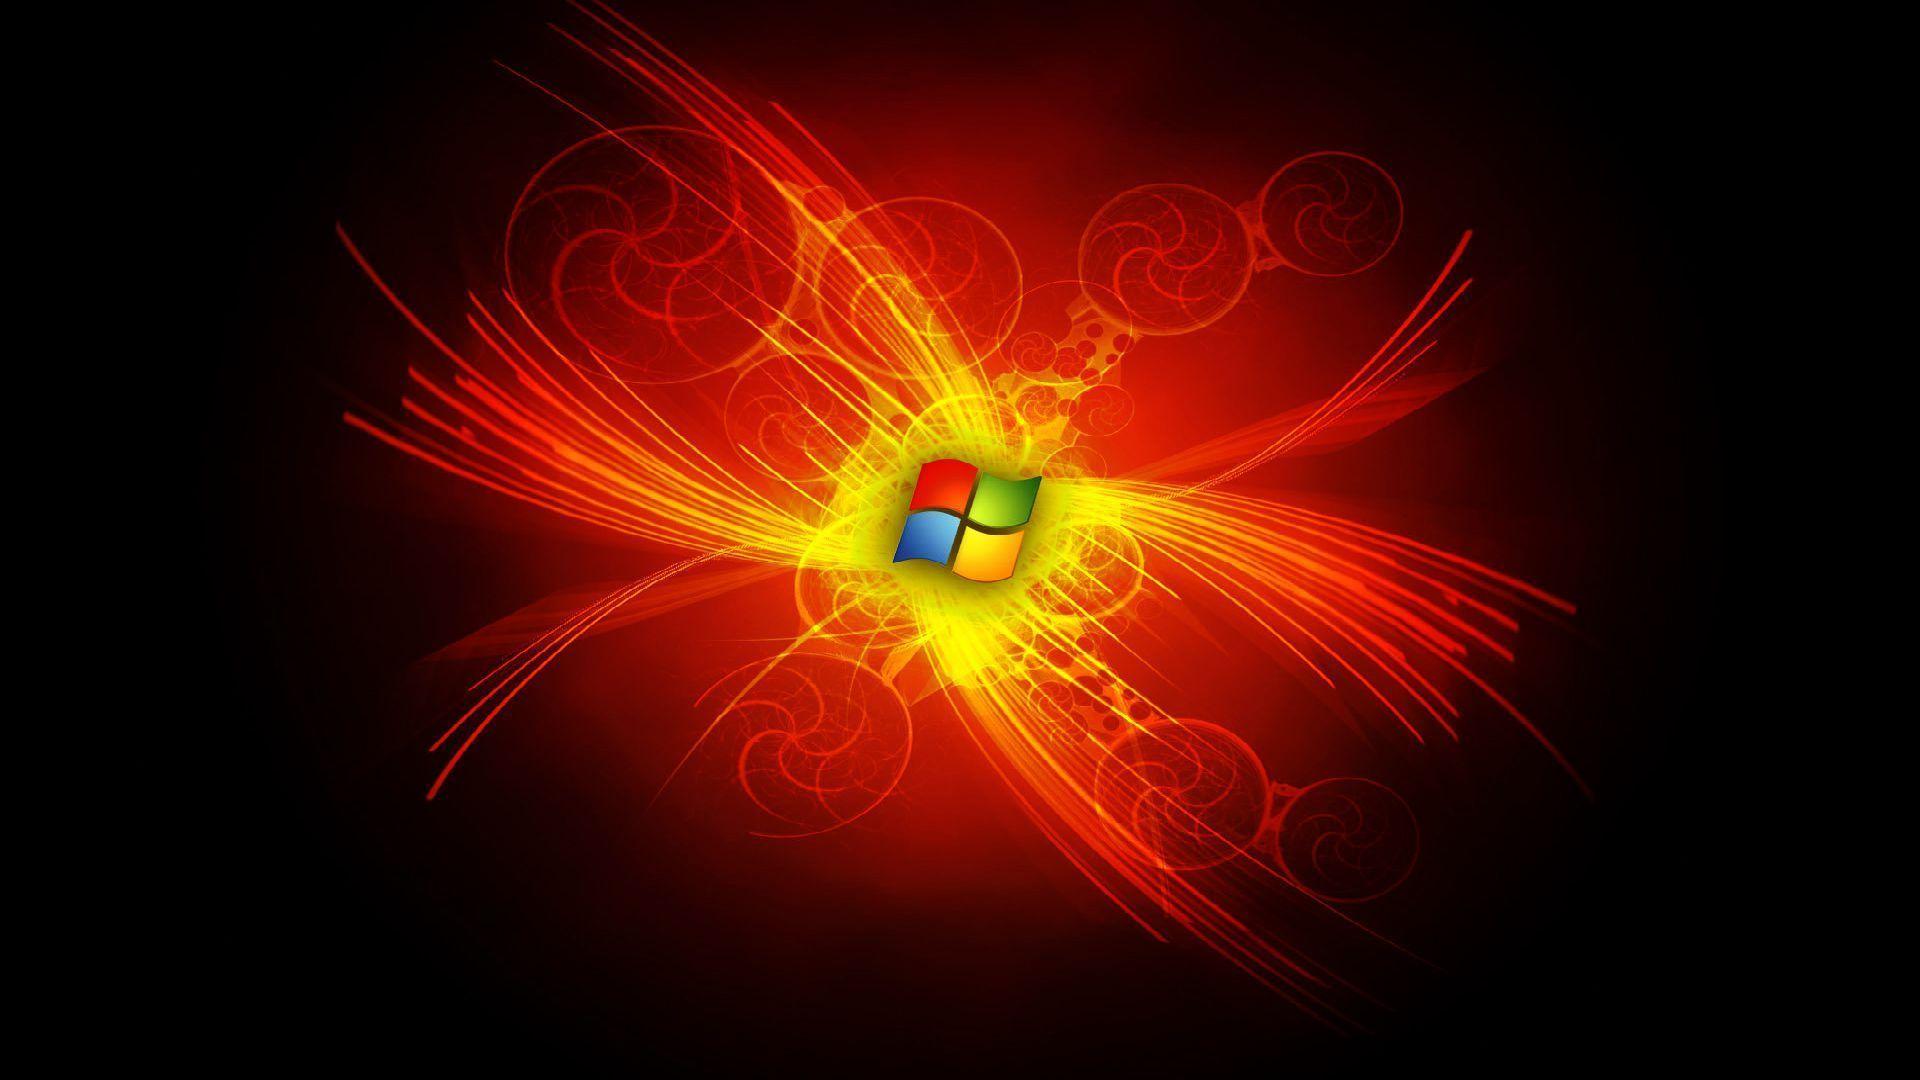 1080p Cool Windows Wallpapers with Orange Backgrounds